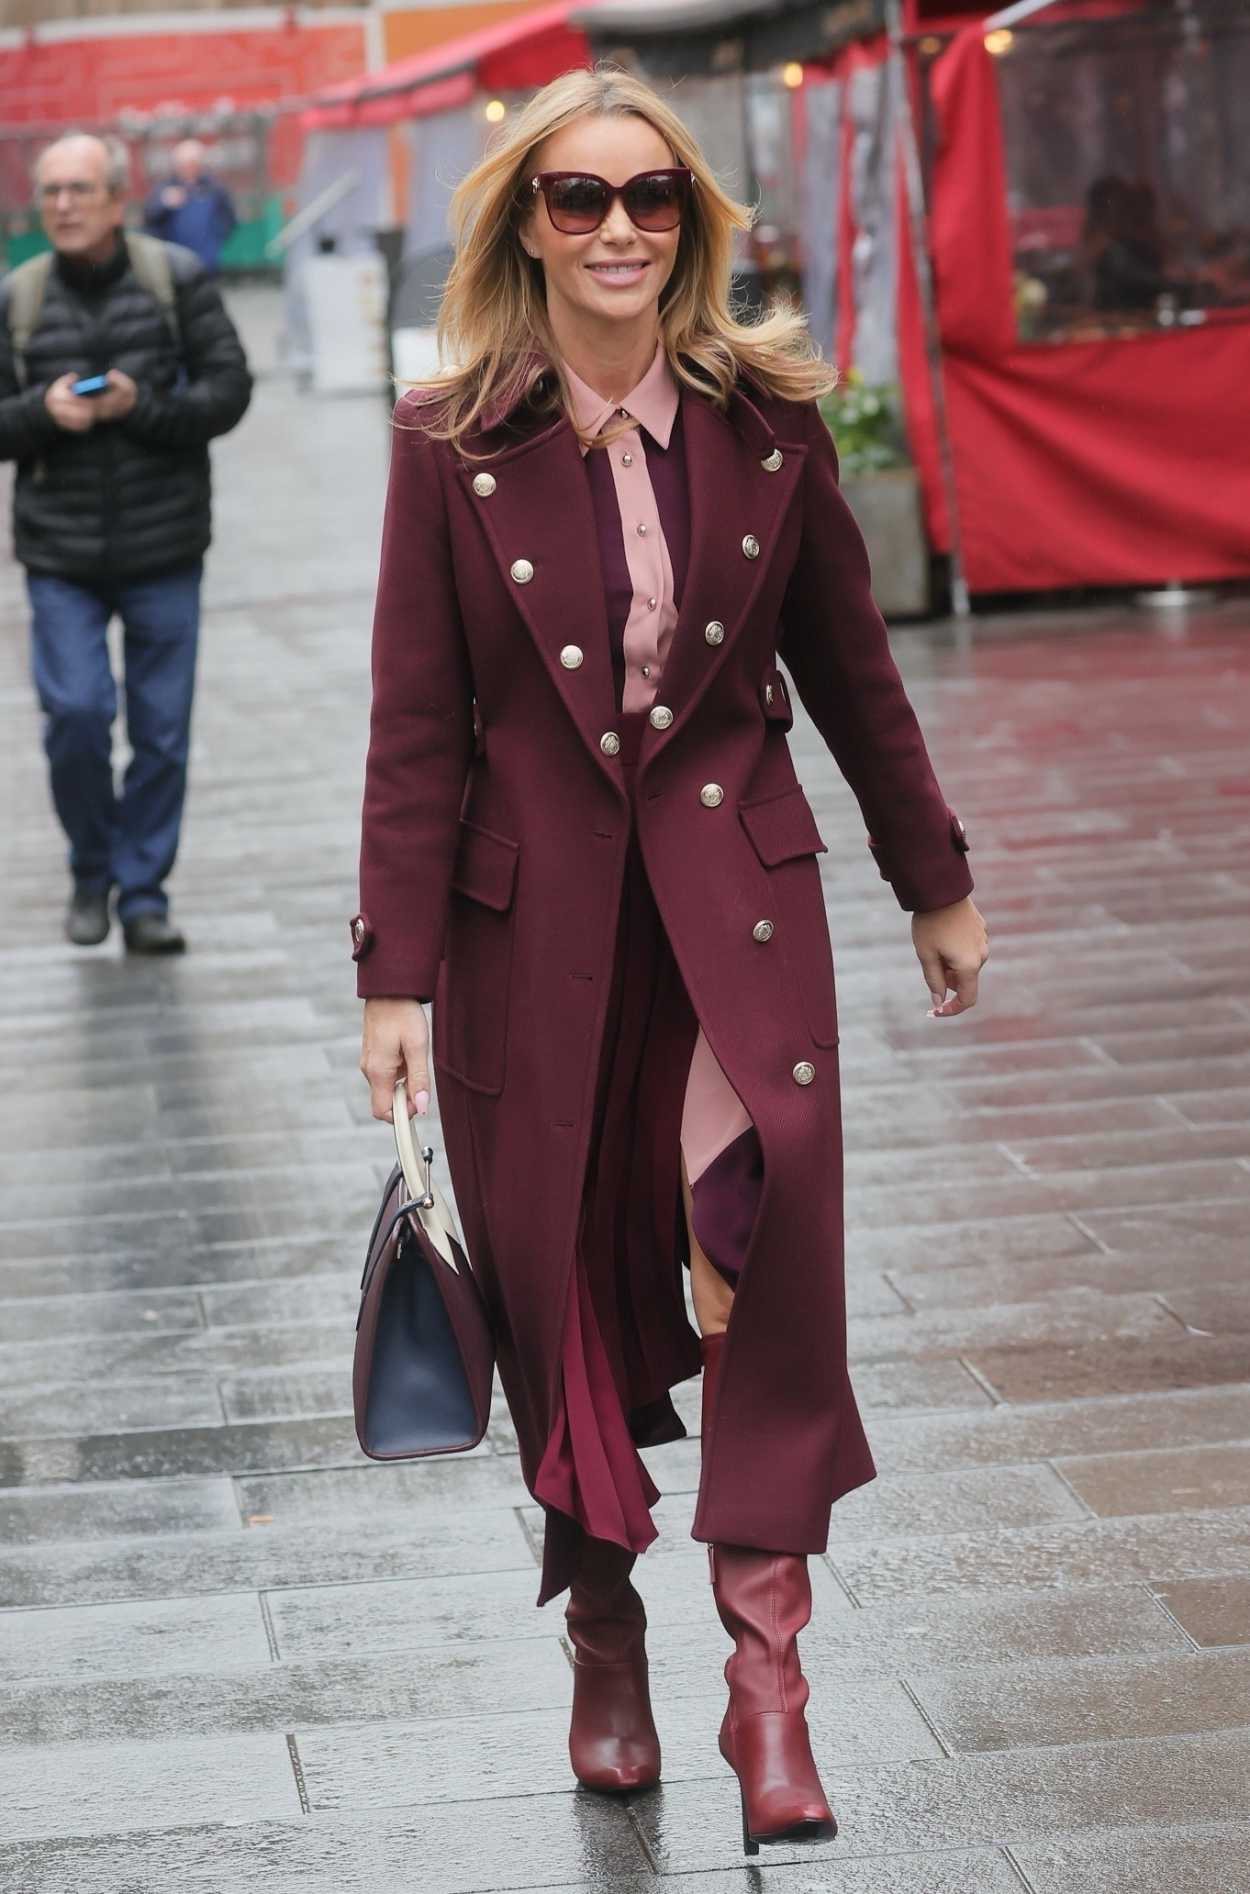 Amanda Holden in a Burgundy Coloured Coat Was Seen Out in London 02/04 ...